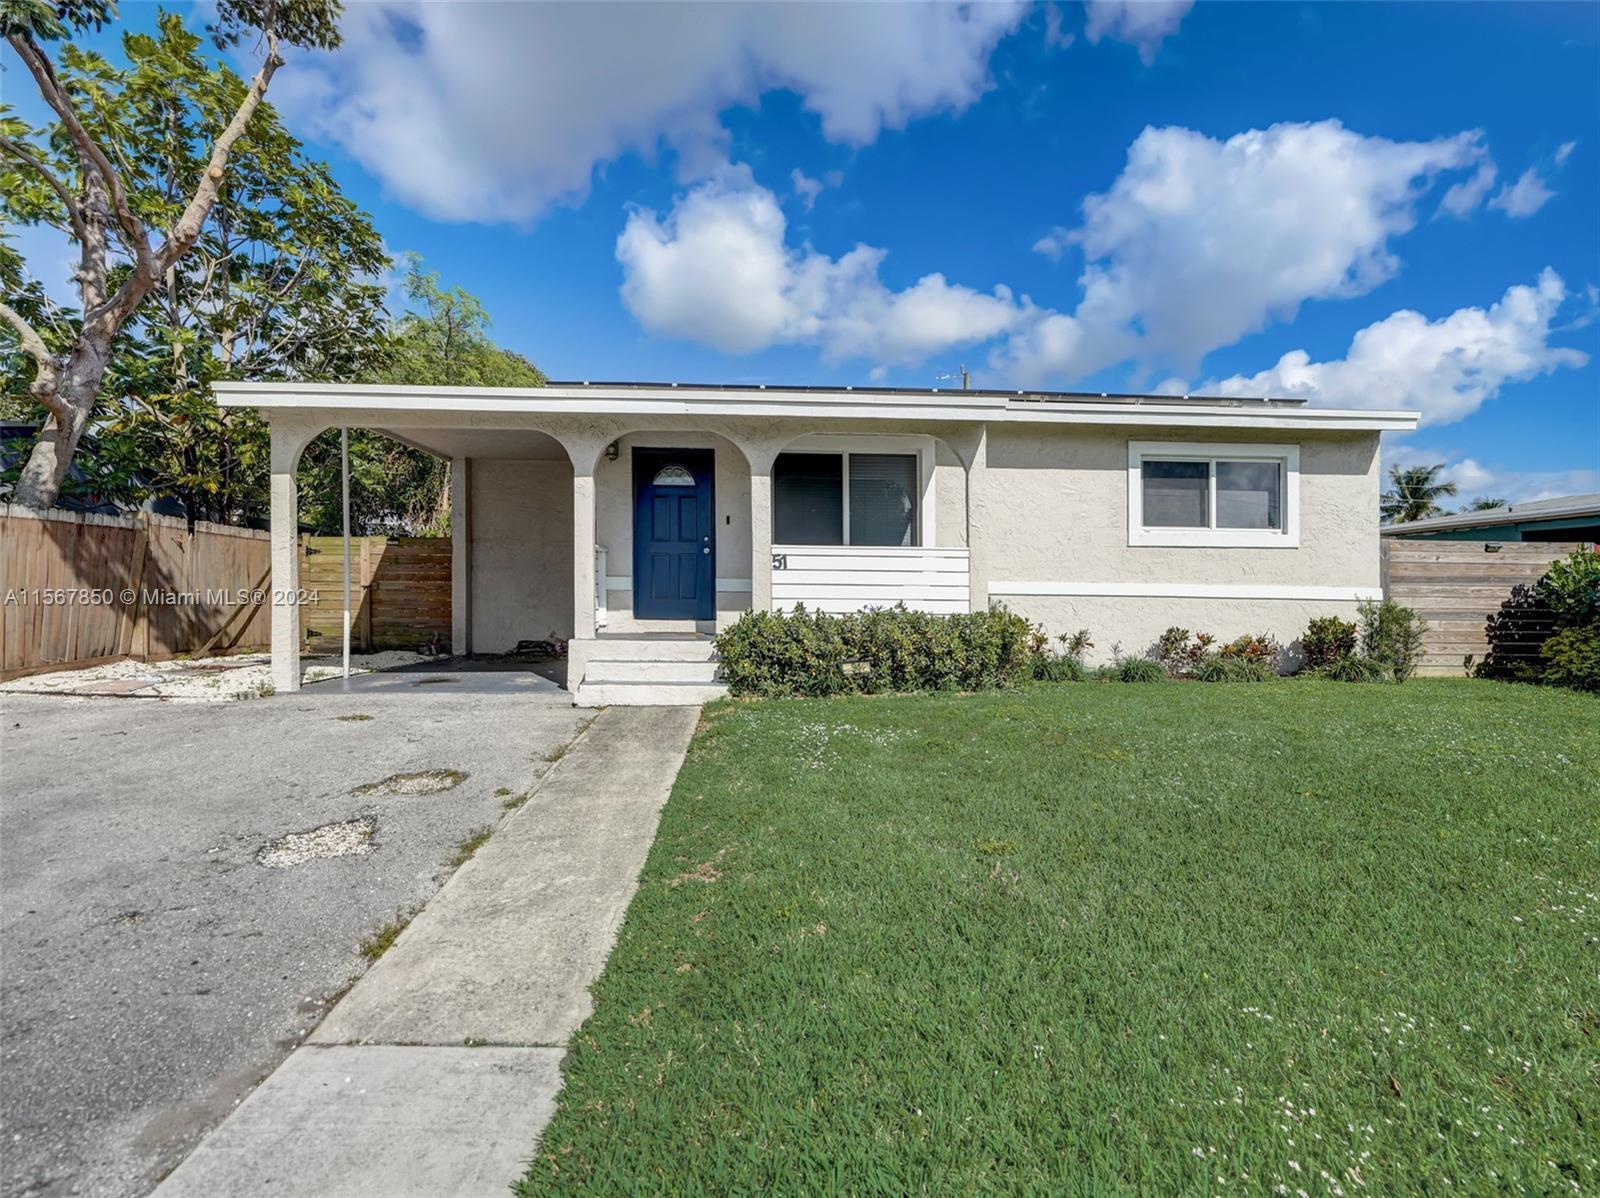 Photo of 51 NW 56th Ct in Oakland Park, FL